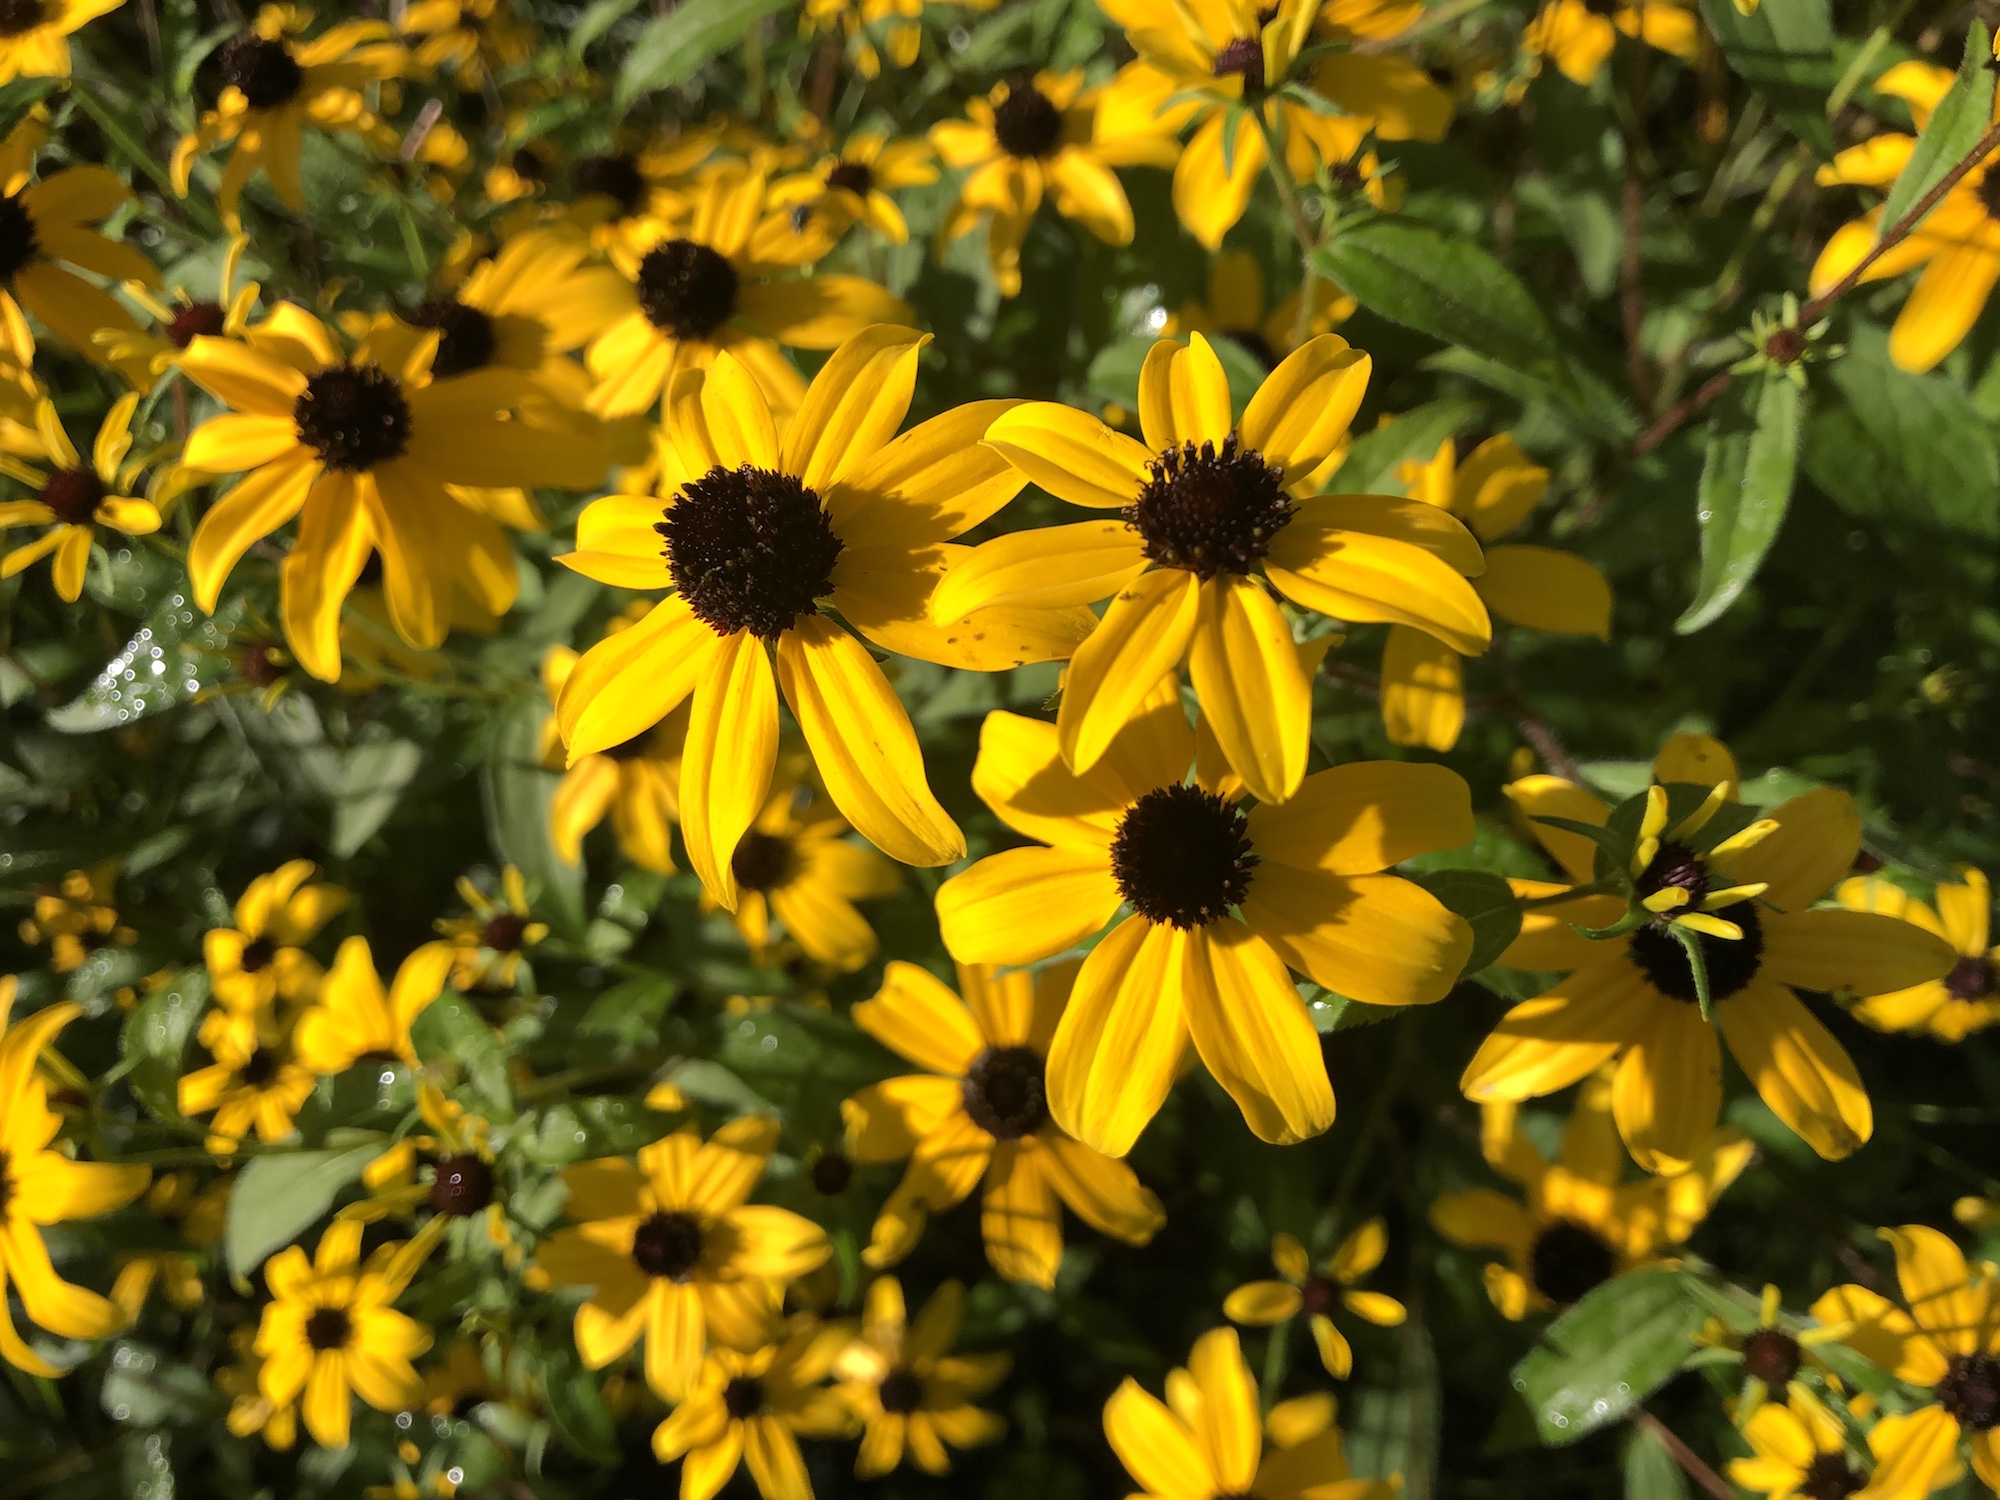 Brown-eyed Susan on bank of retaining pond in Madison, Wisconsin on August 27, 2019.